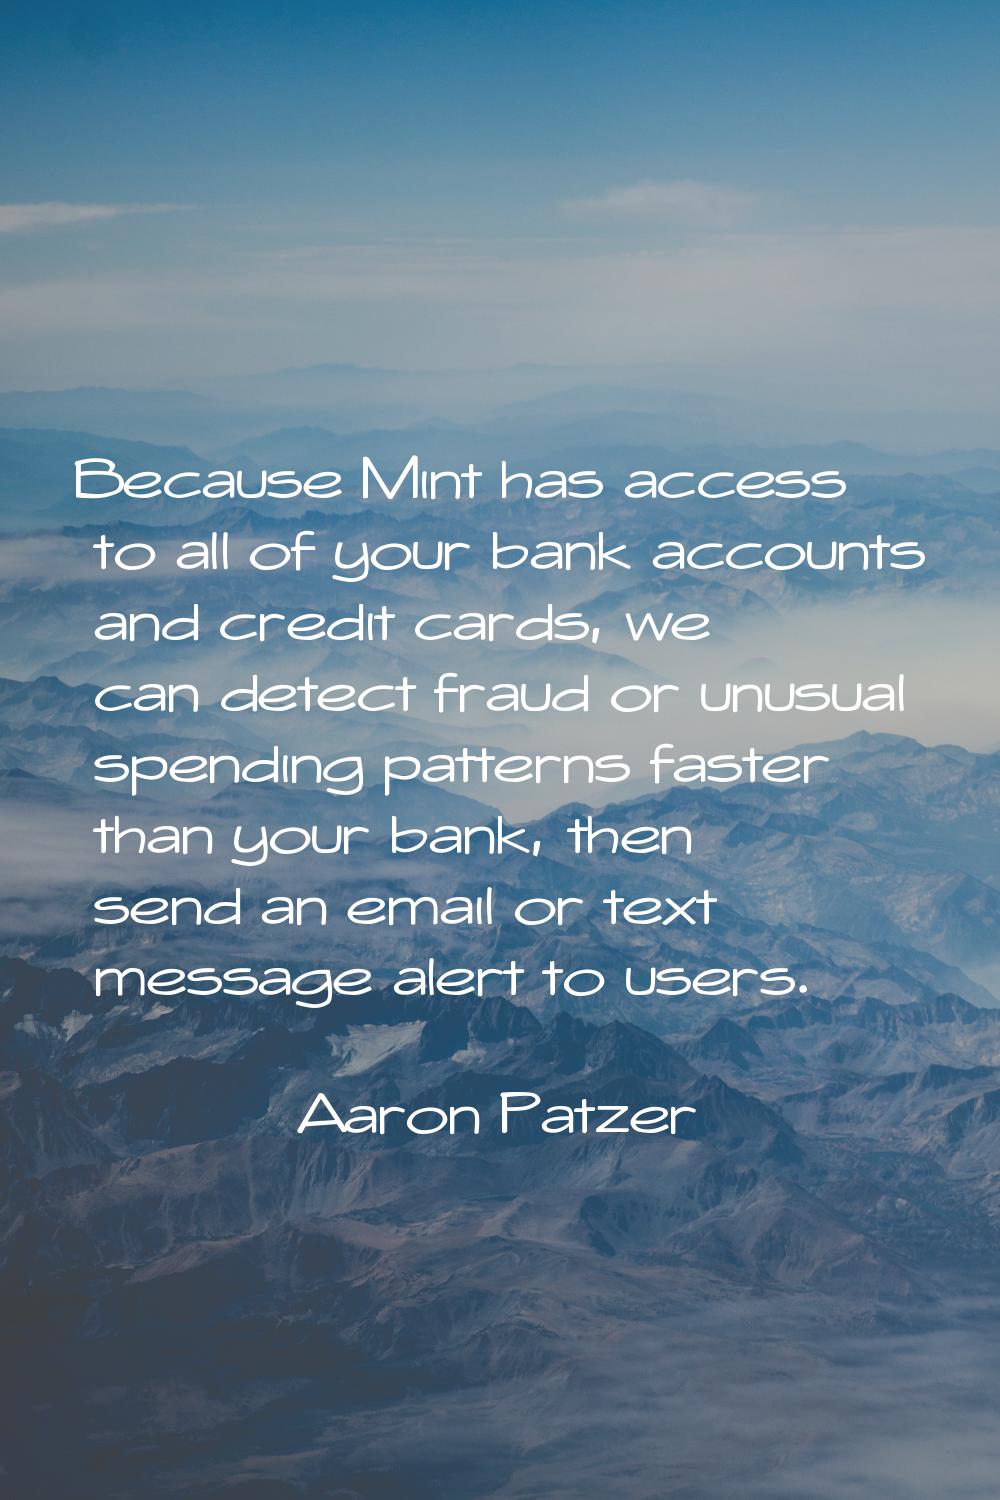 Because Mint has access to all of your bank accounts and credit cards, we can detect fraud or unusu